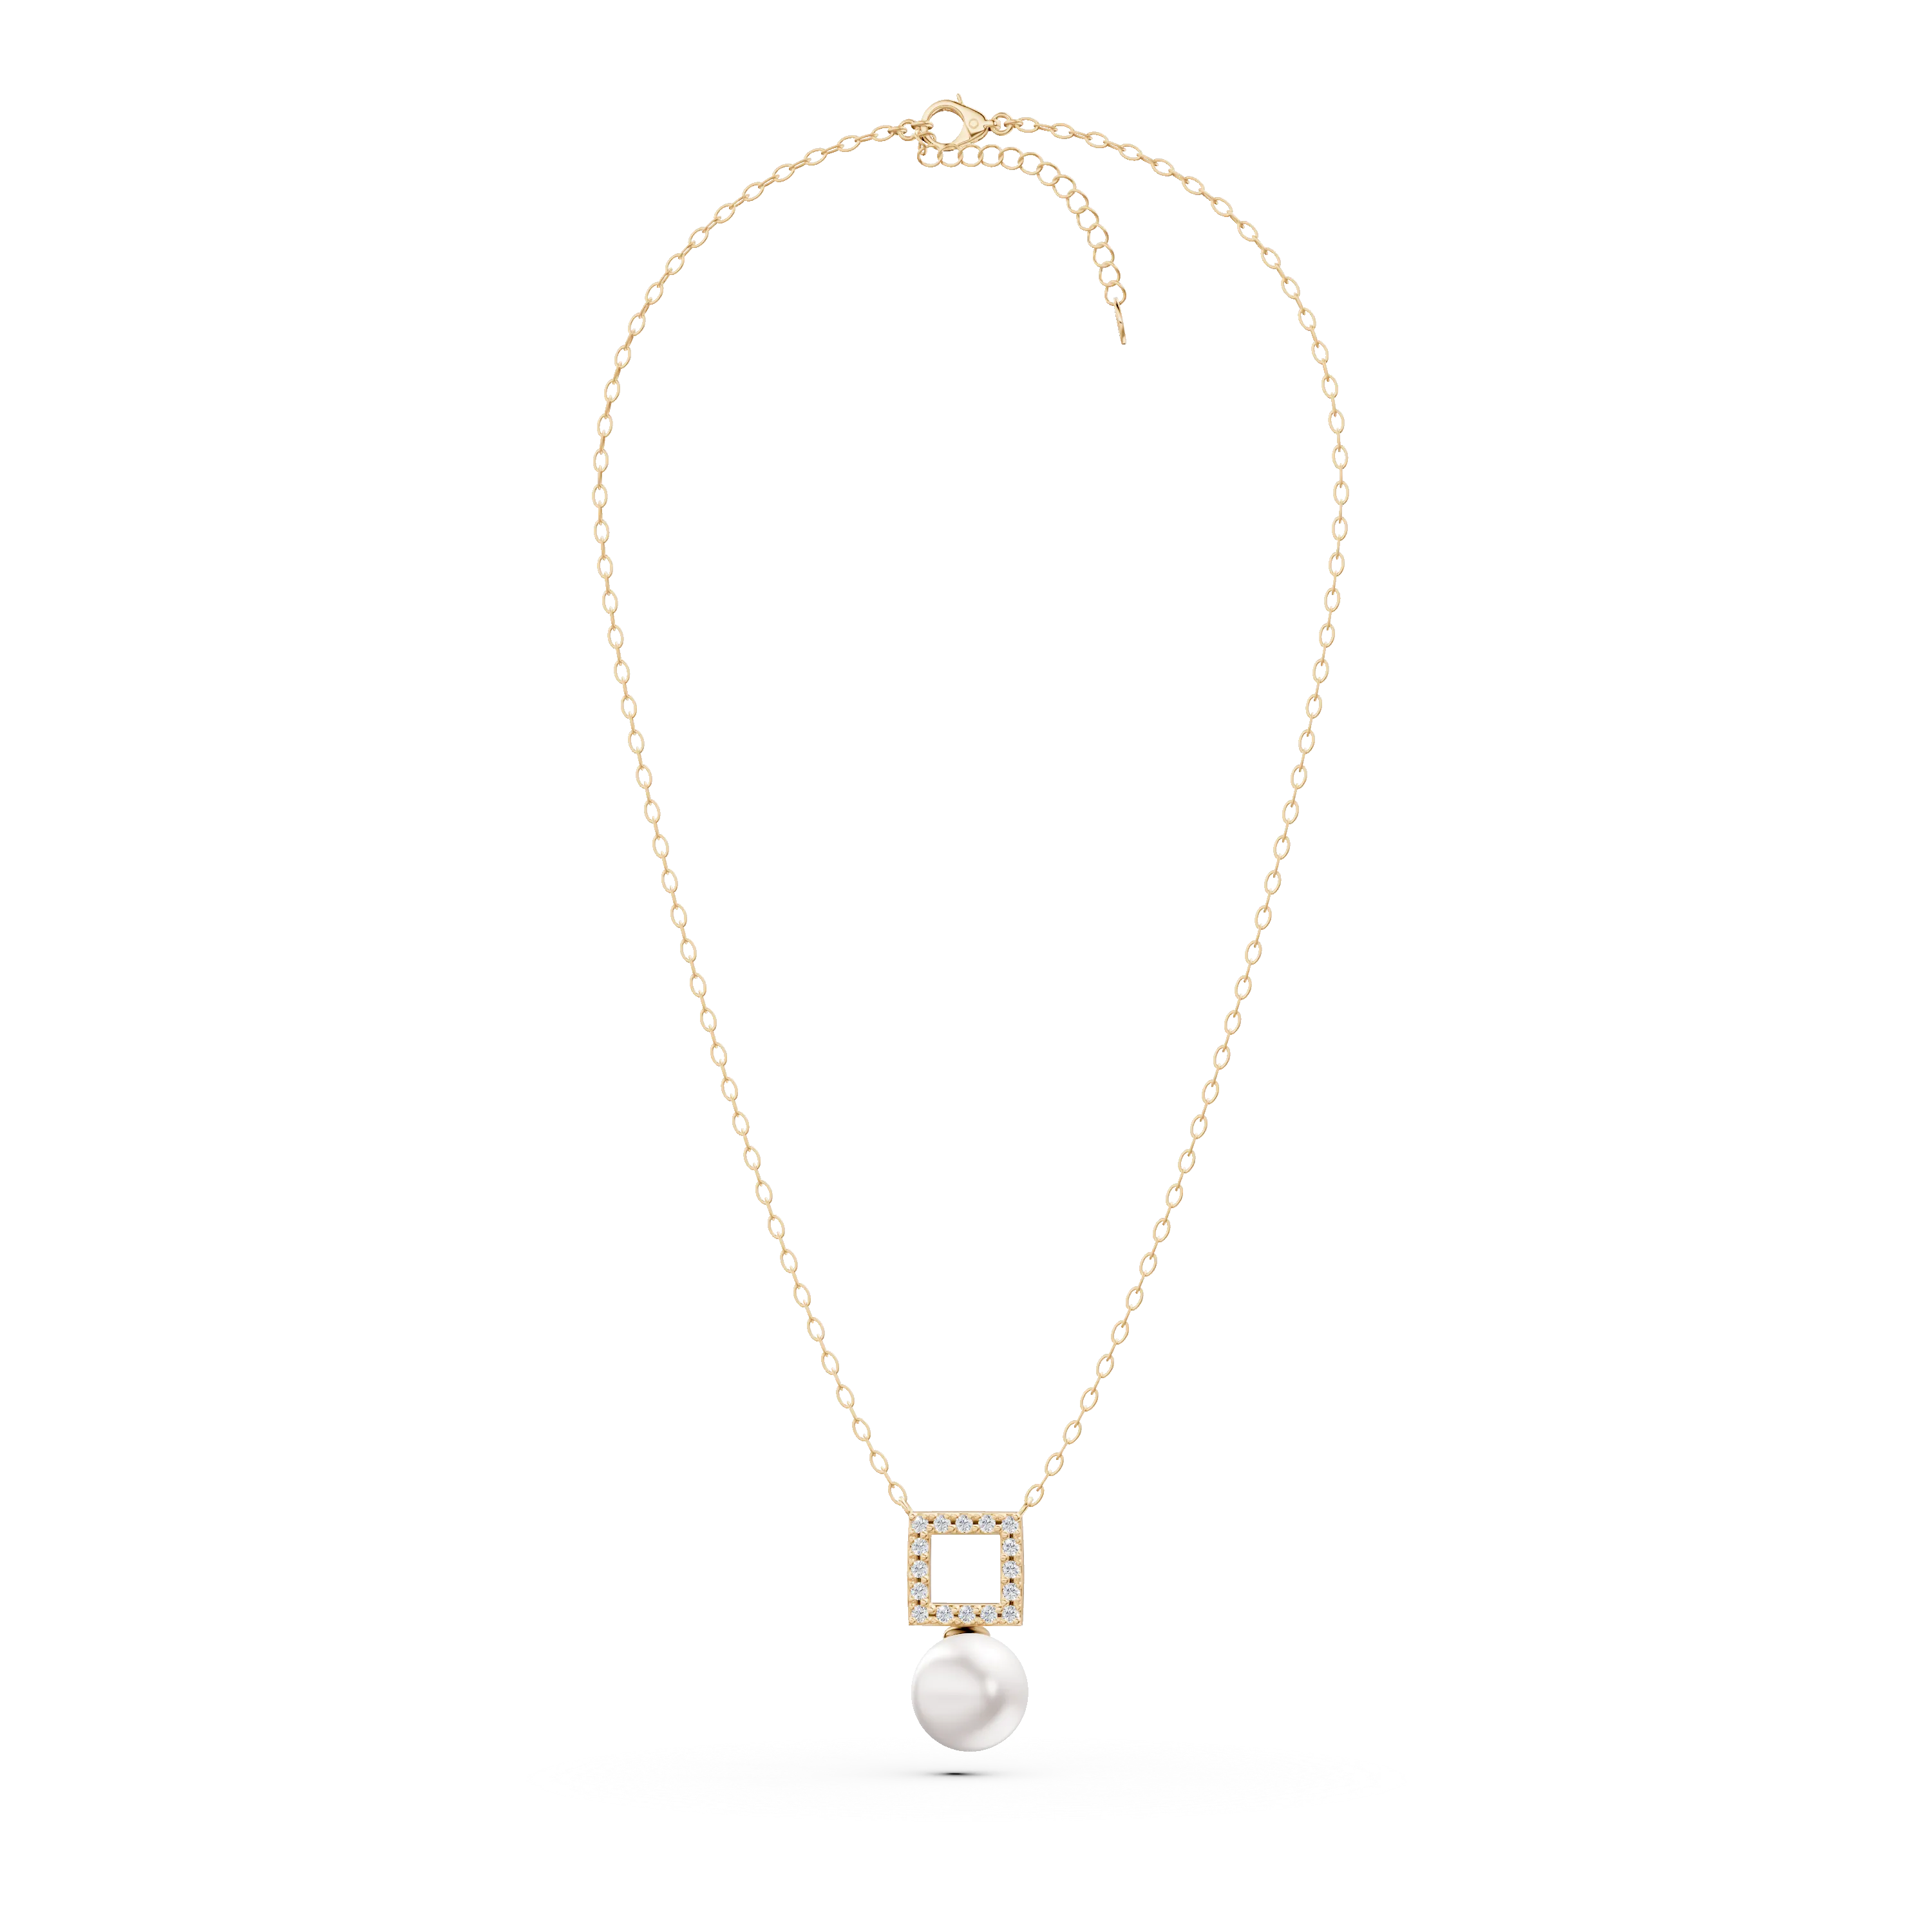 Yellow gold geometric pendant necklace with zirconia and synthetic pearl